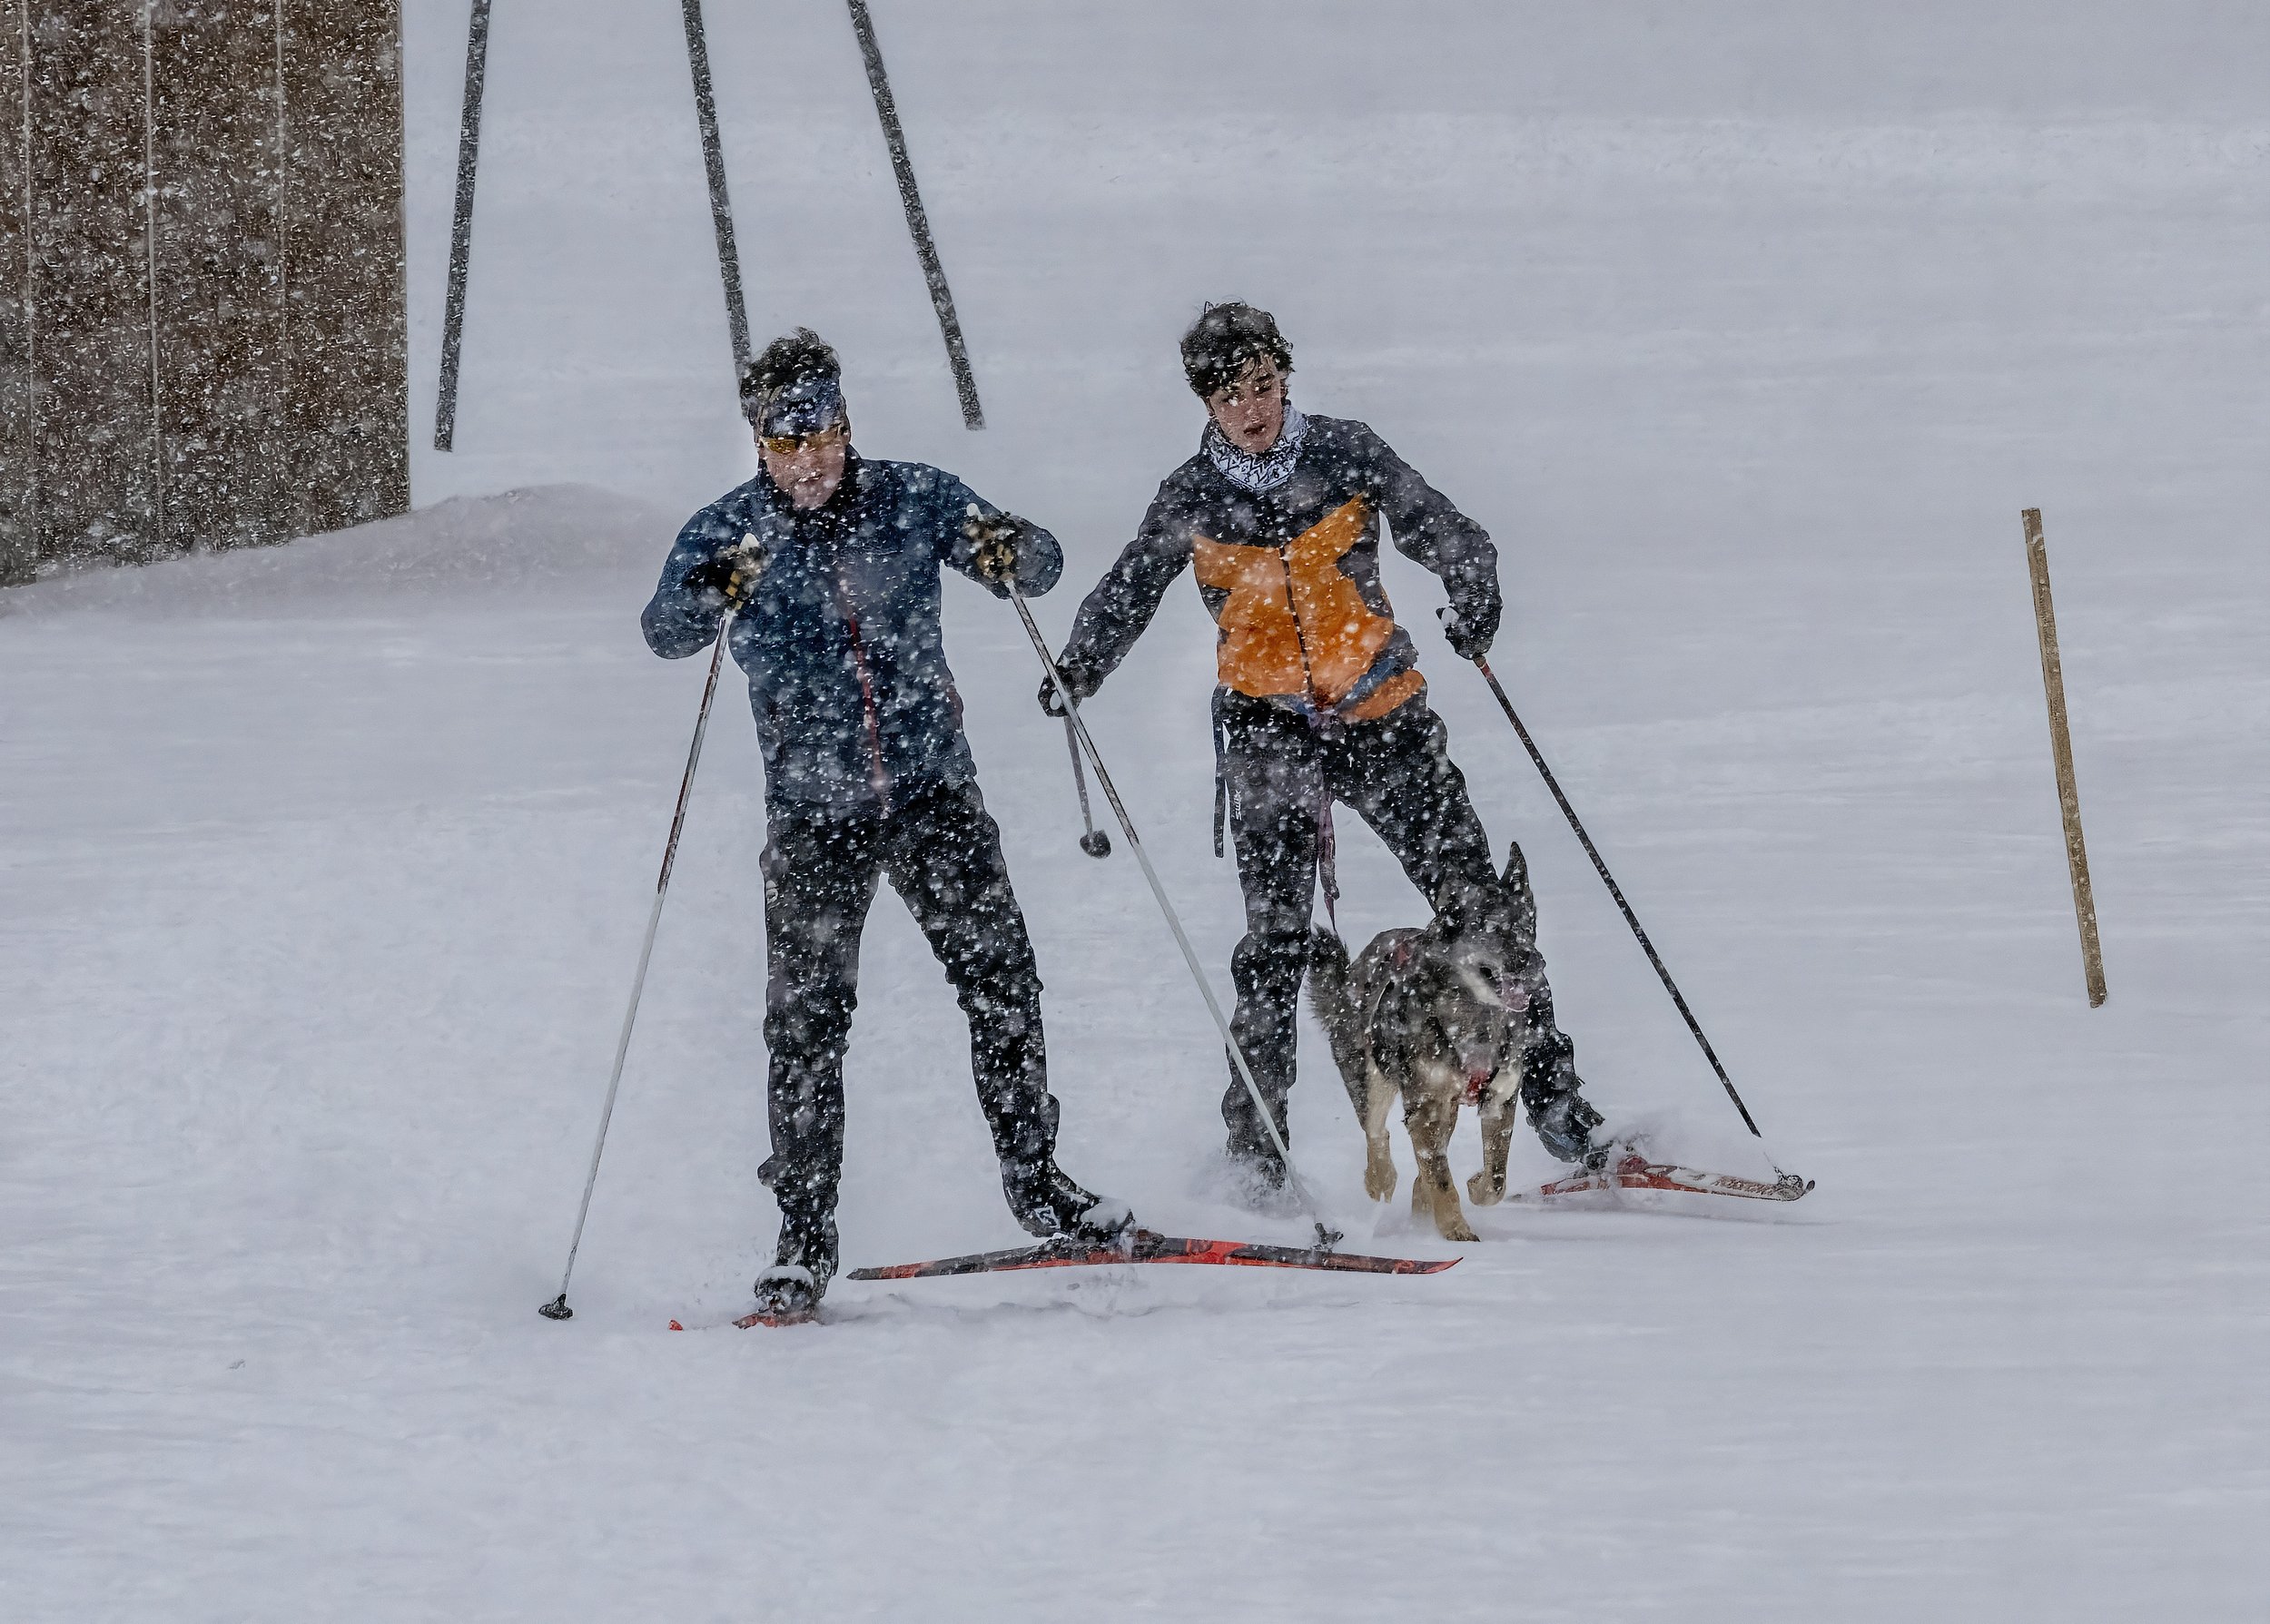  Cross-country skiers at Dac Rowe Park employ dog power. Photo by Gordon Miller  